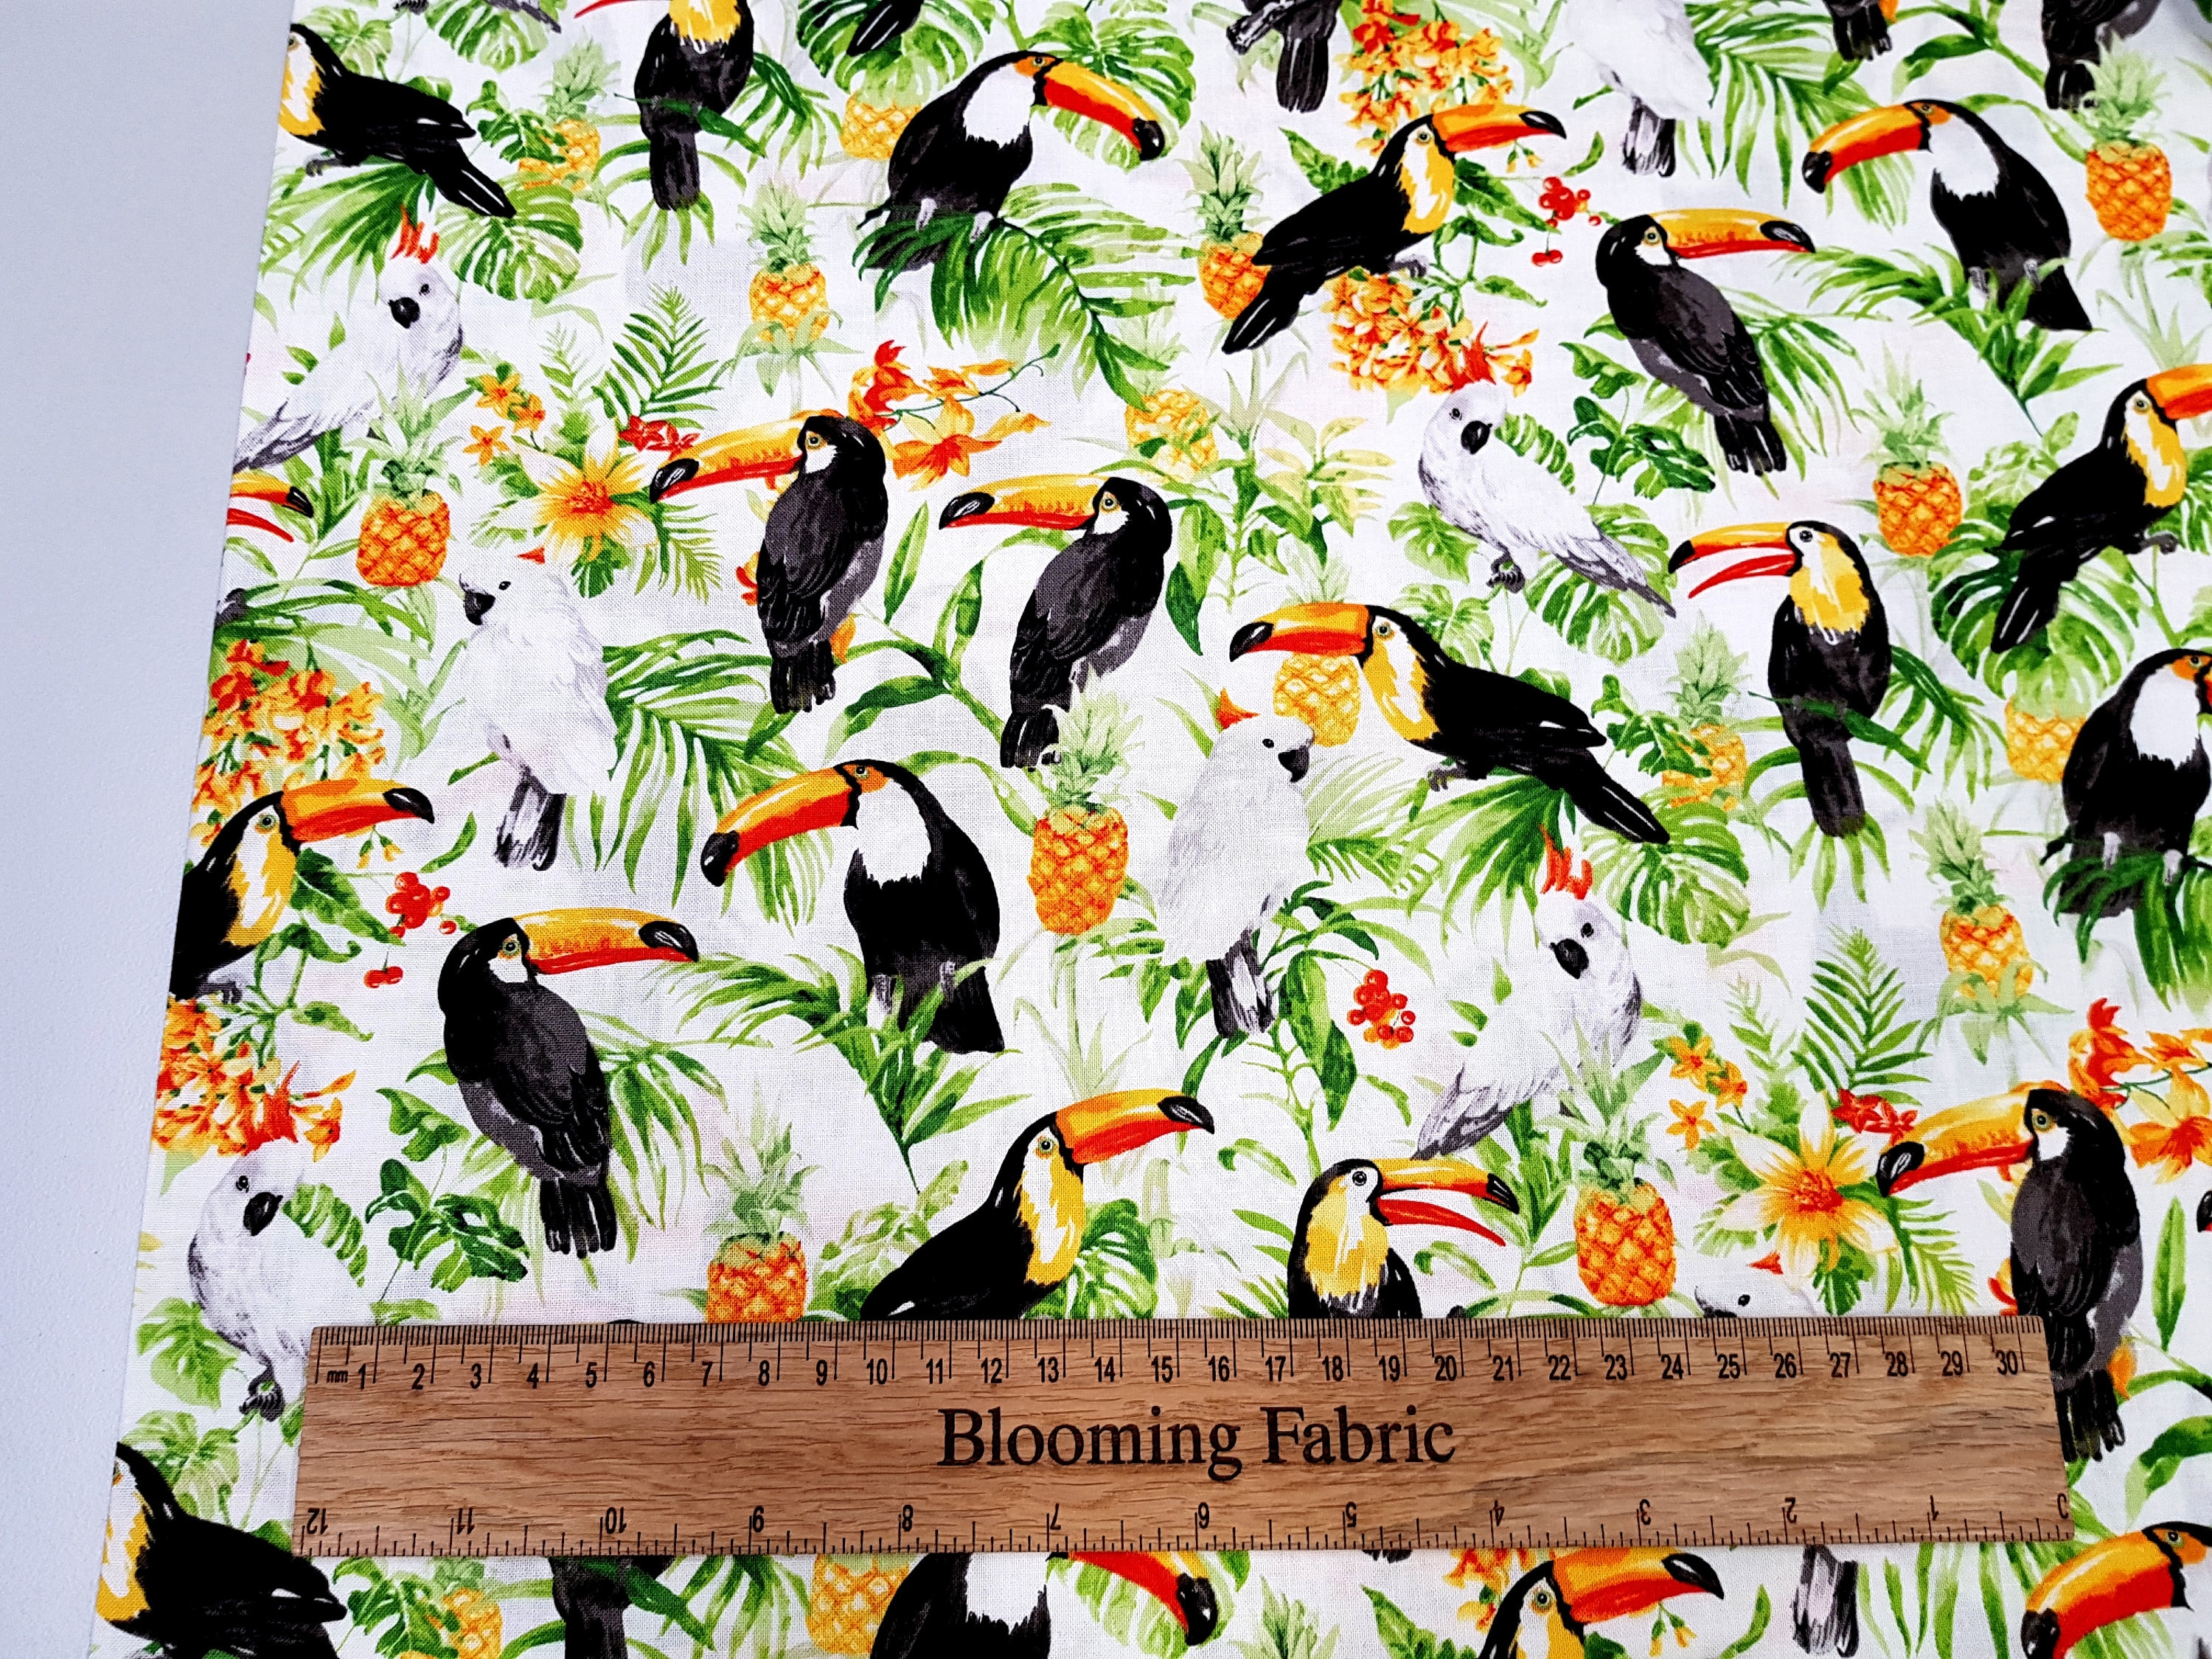 craft and clothing quilting fabric Yard Meter 43 wide 100% cotton Tropical fabric toucans fabric Hawaiian fabric